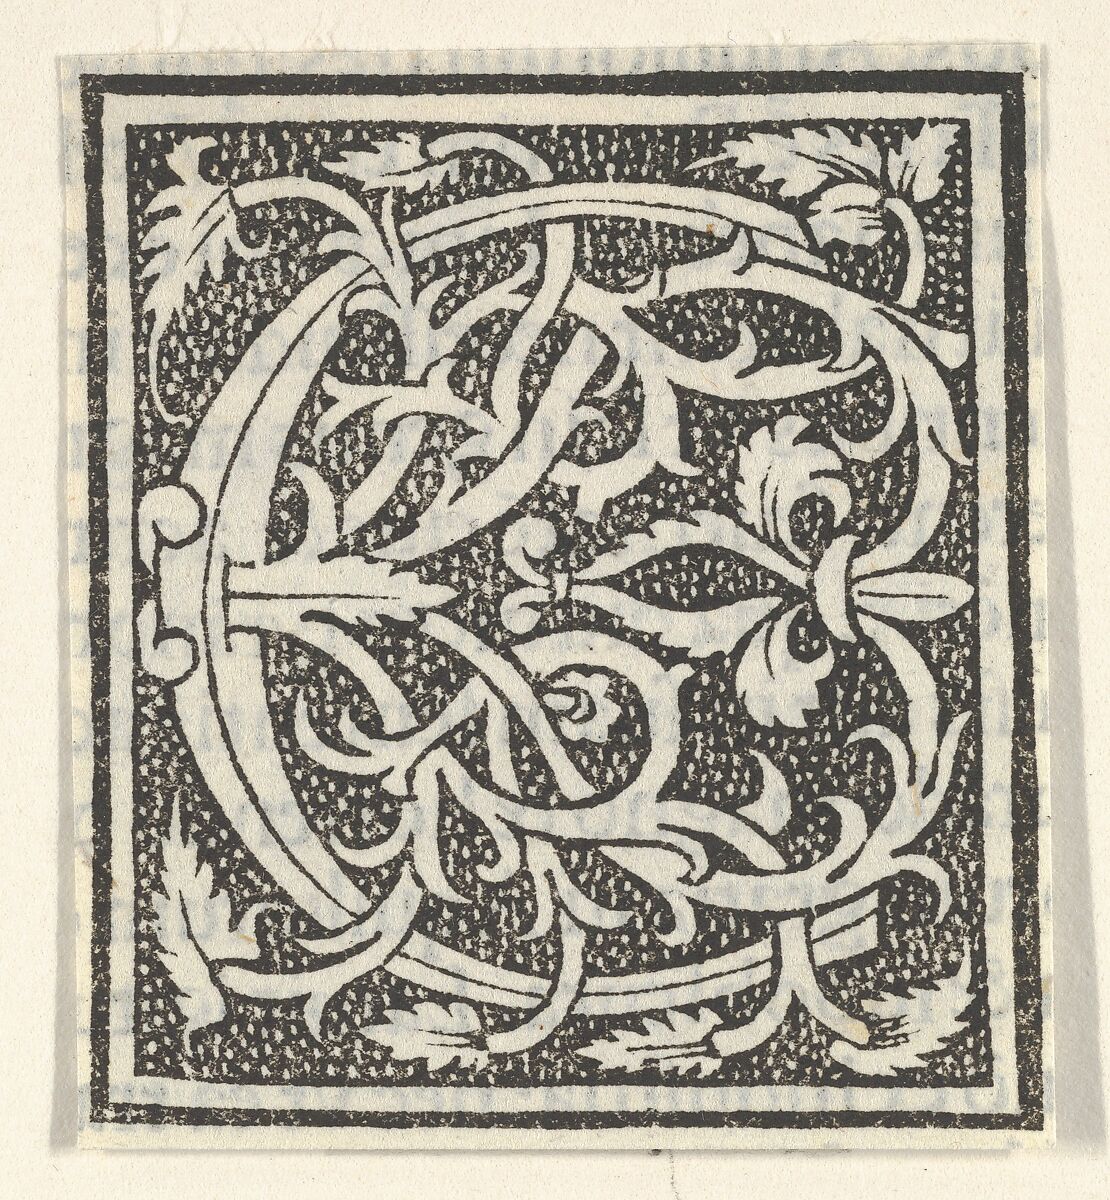 Initial letter C on patterned background, Anonymous, Italian, 16th century, Woodcut, criblé ground 